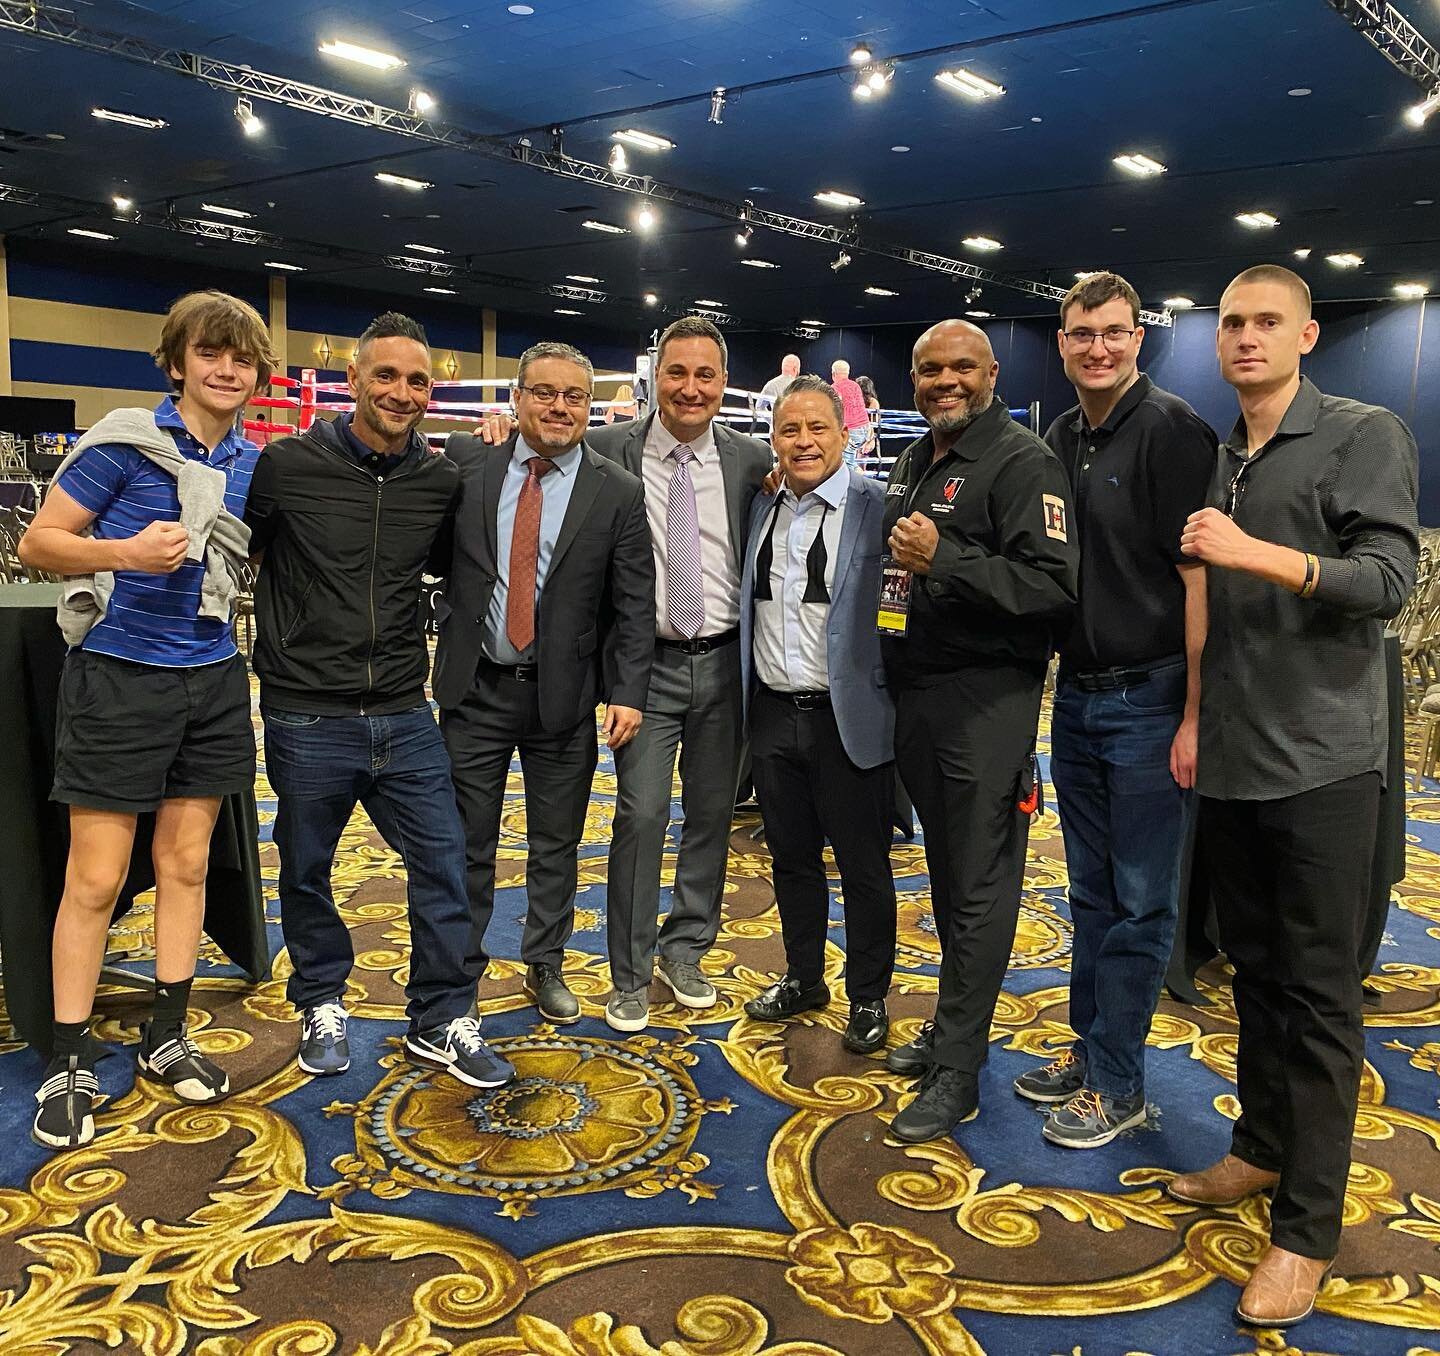 What a night in Vegas!  Huge congratulations to our very own Chris Flores for refereeing in his first Vegas boxing match 🔥

#proper #boxing #properboxing #vegas #lasvegas #bigtime #referee #official #matches #pbcboxing #tmc #marathon #toprankboxing 